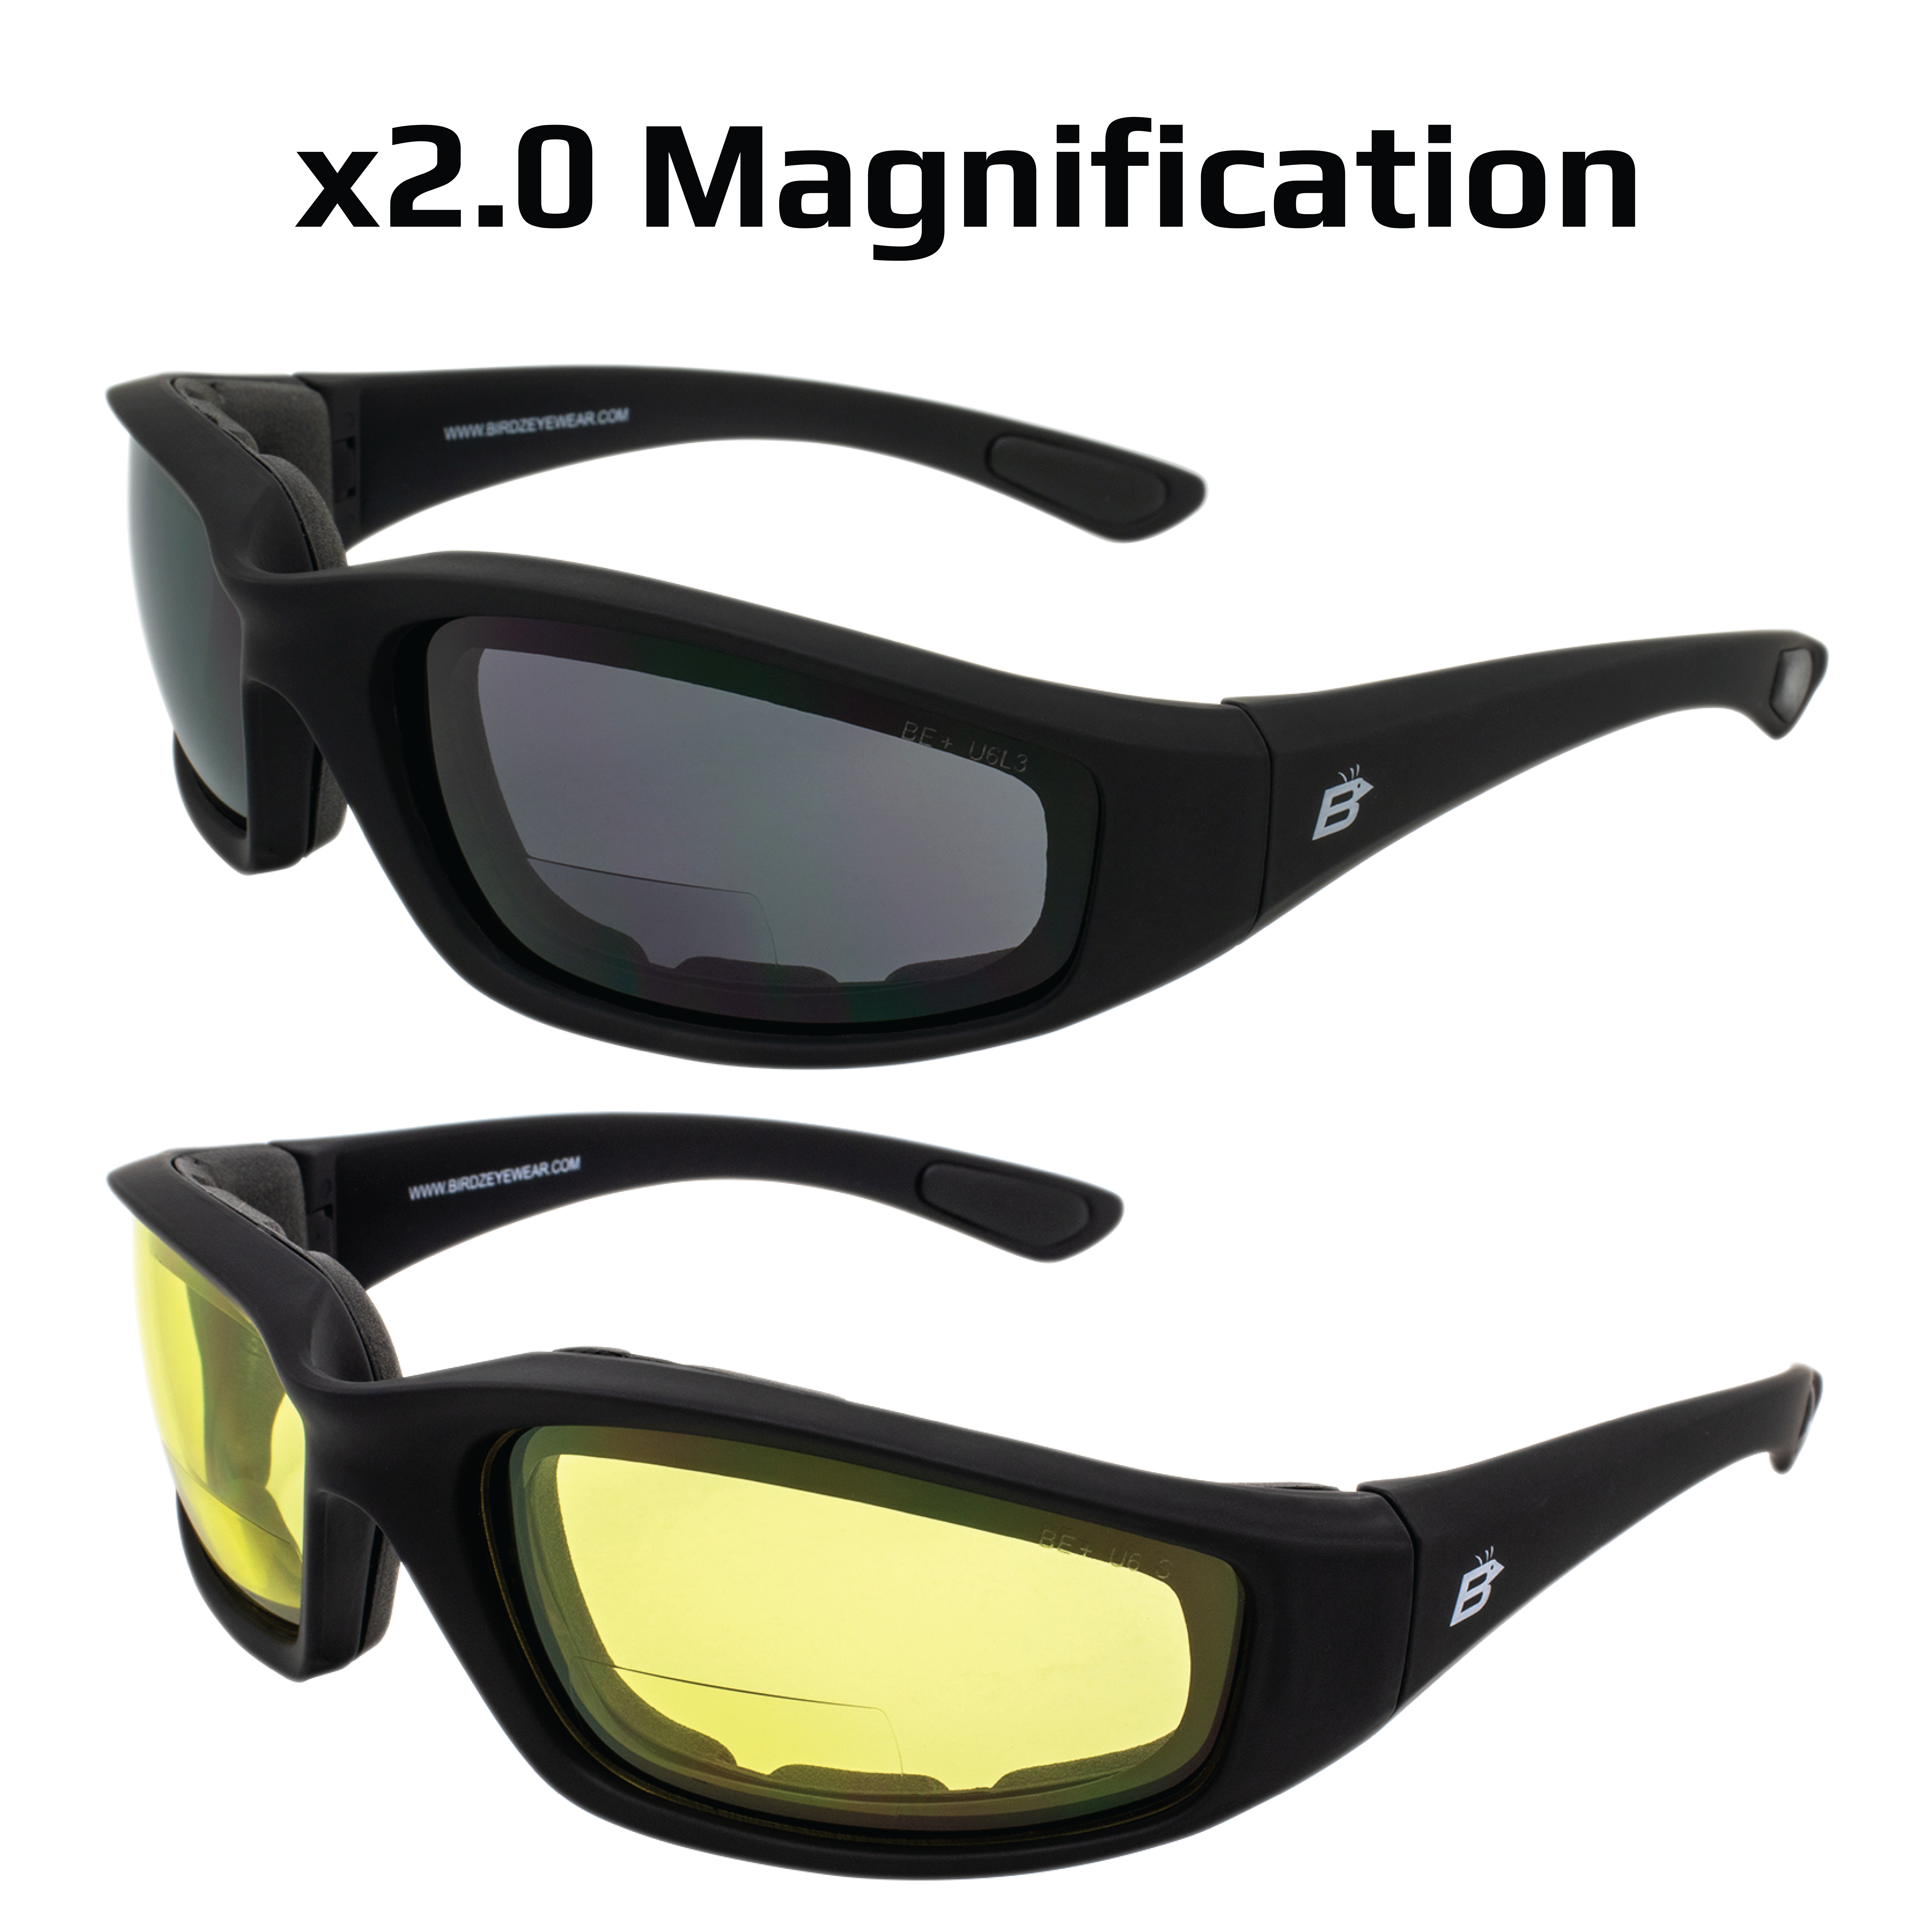 2 Pairs of Birdz Oriole Bifocal Safety Sunglasses Black Frames 2.0X with Smoke & Yellow Lenses - image 5 of 8